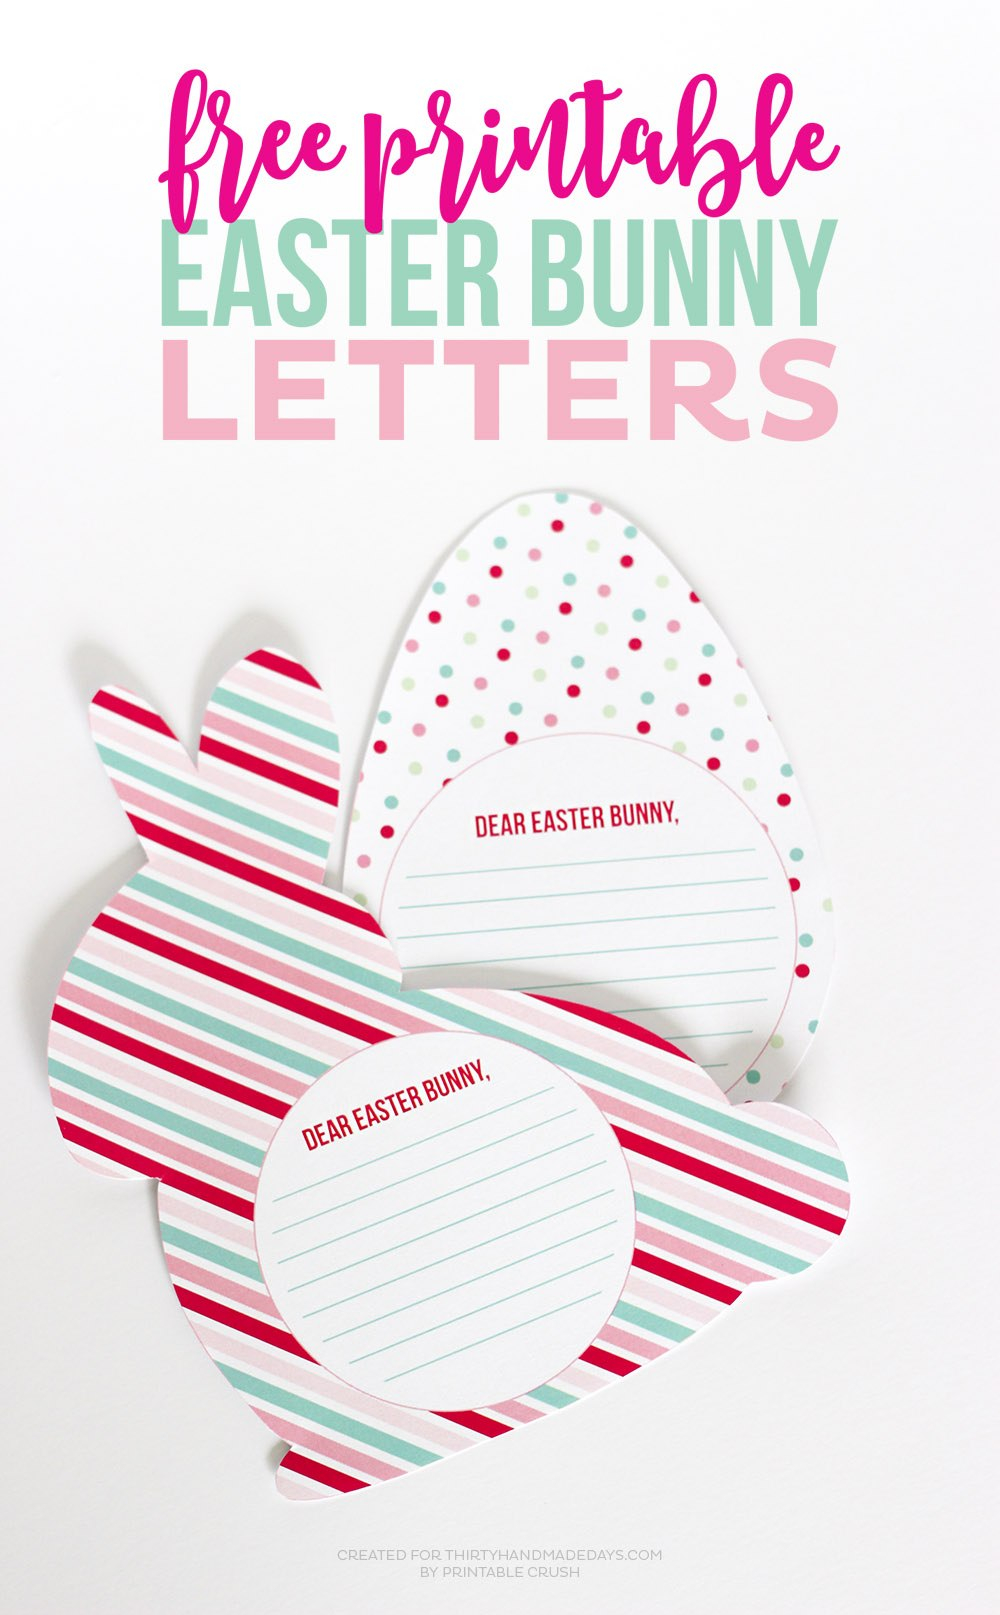 Free Printable Easter Bunny Letters  Thirty Handmade Days with Letter To Easter Bunny Template